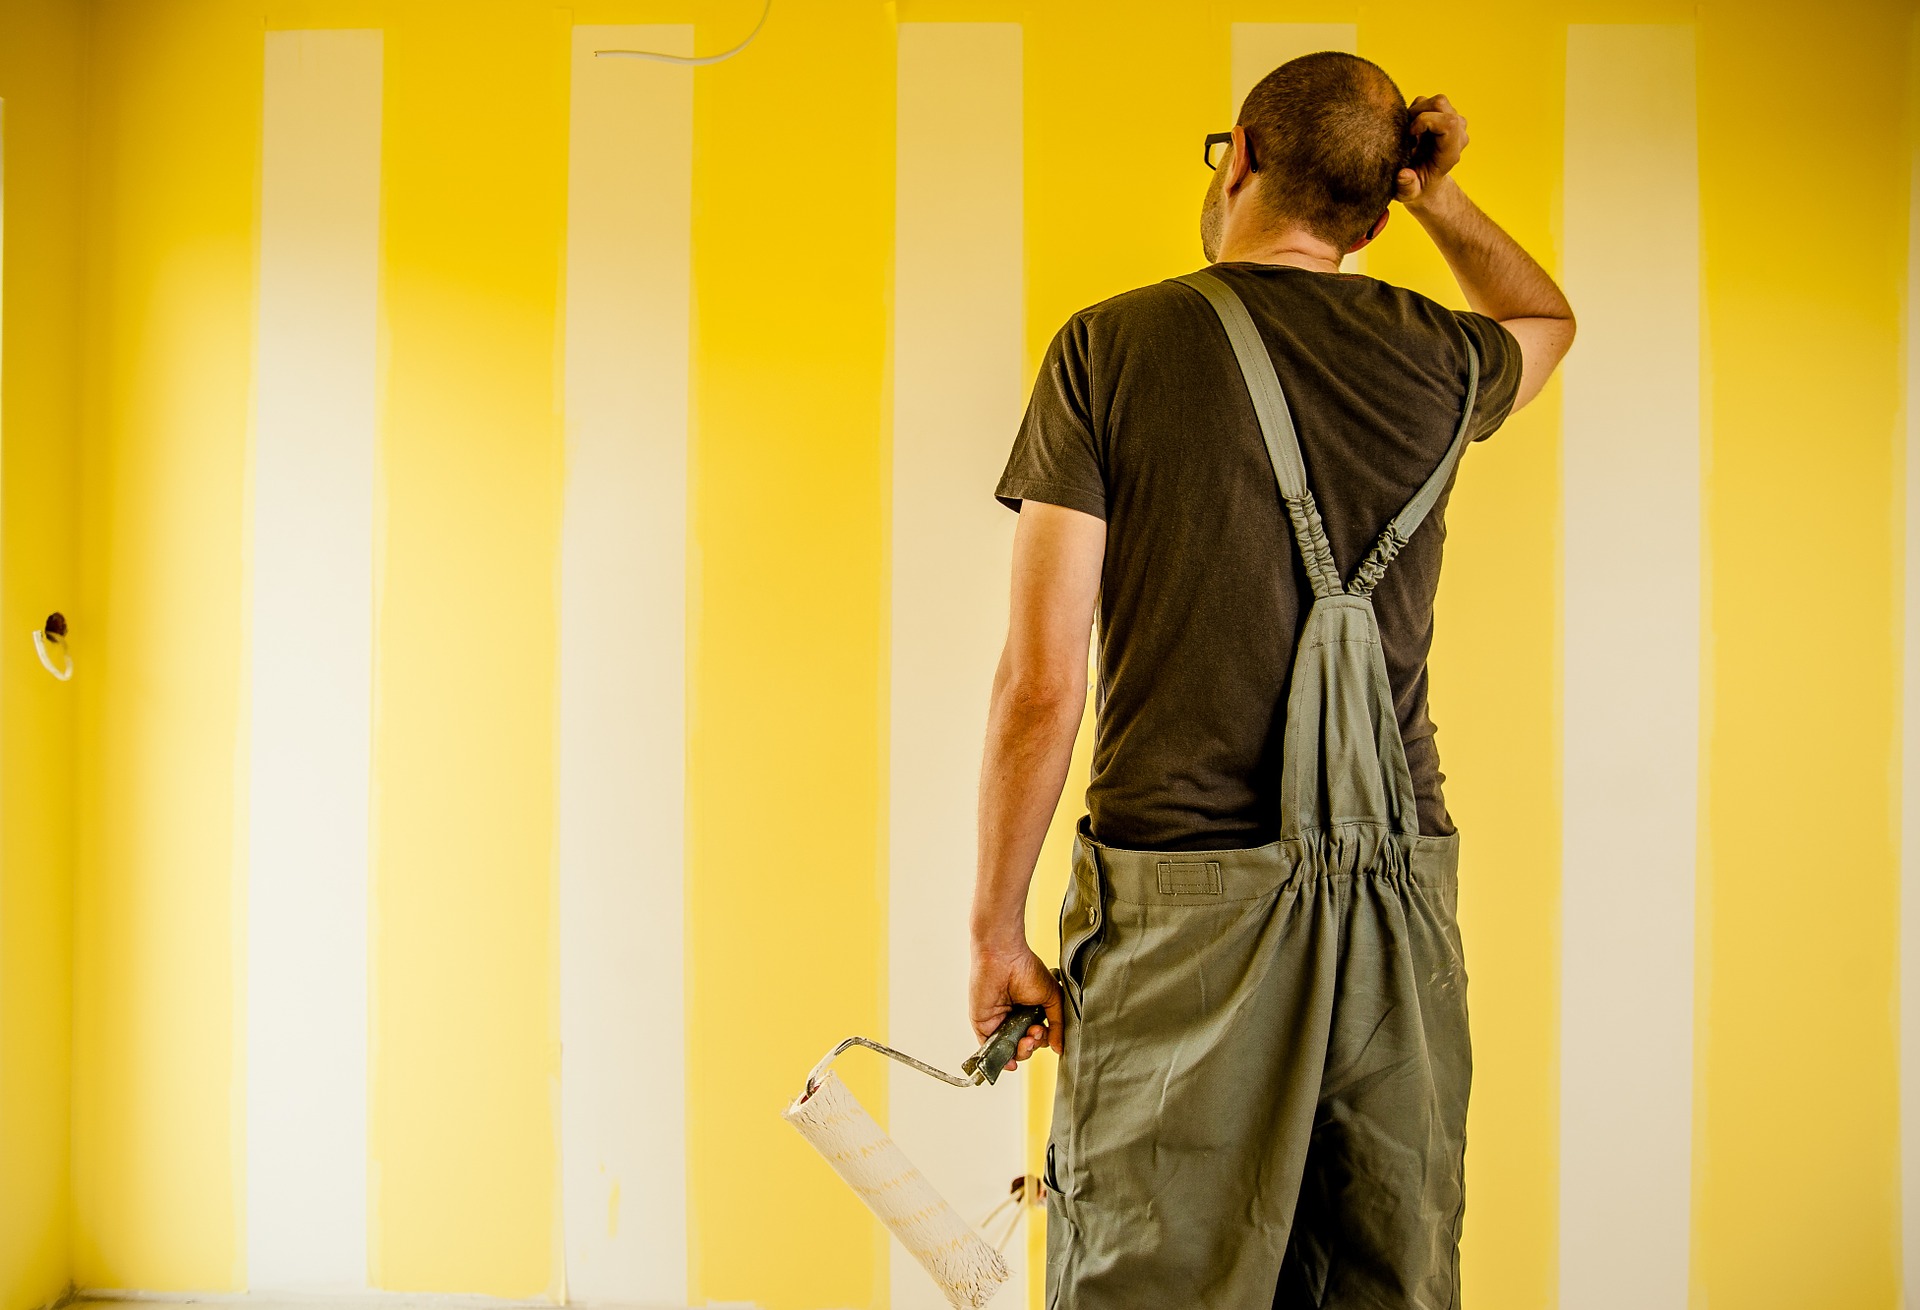 Painting Service in Southampton